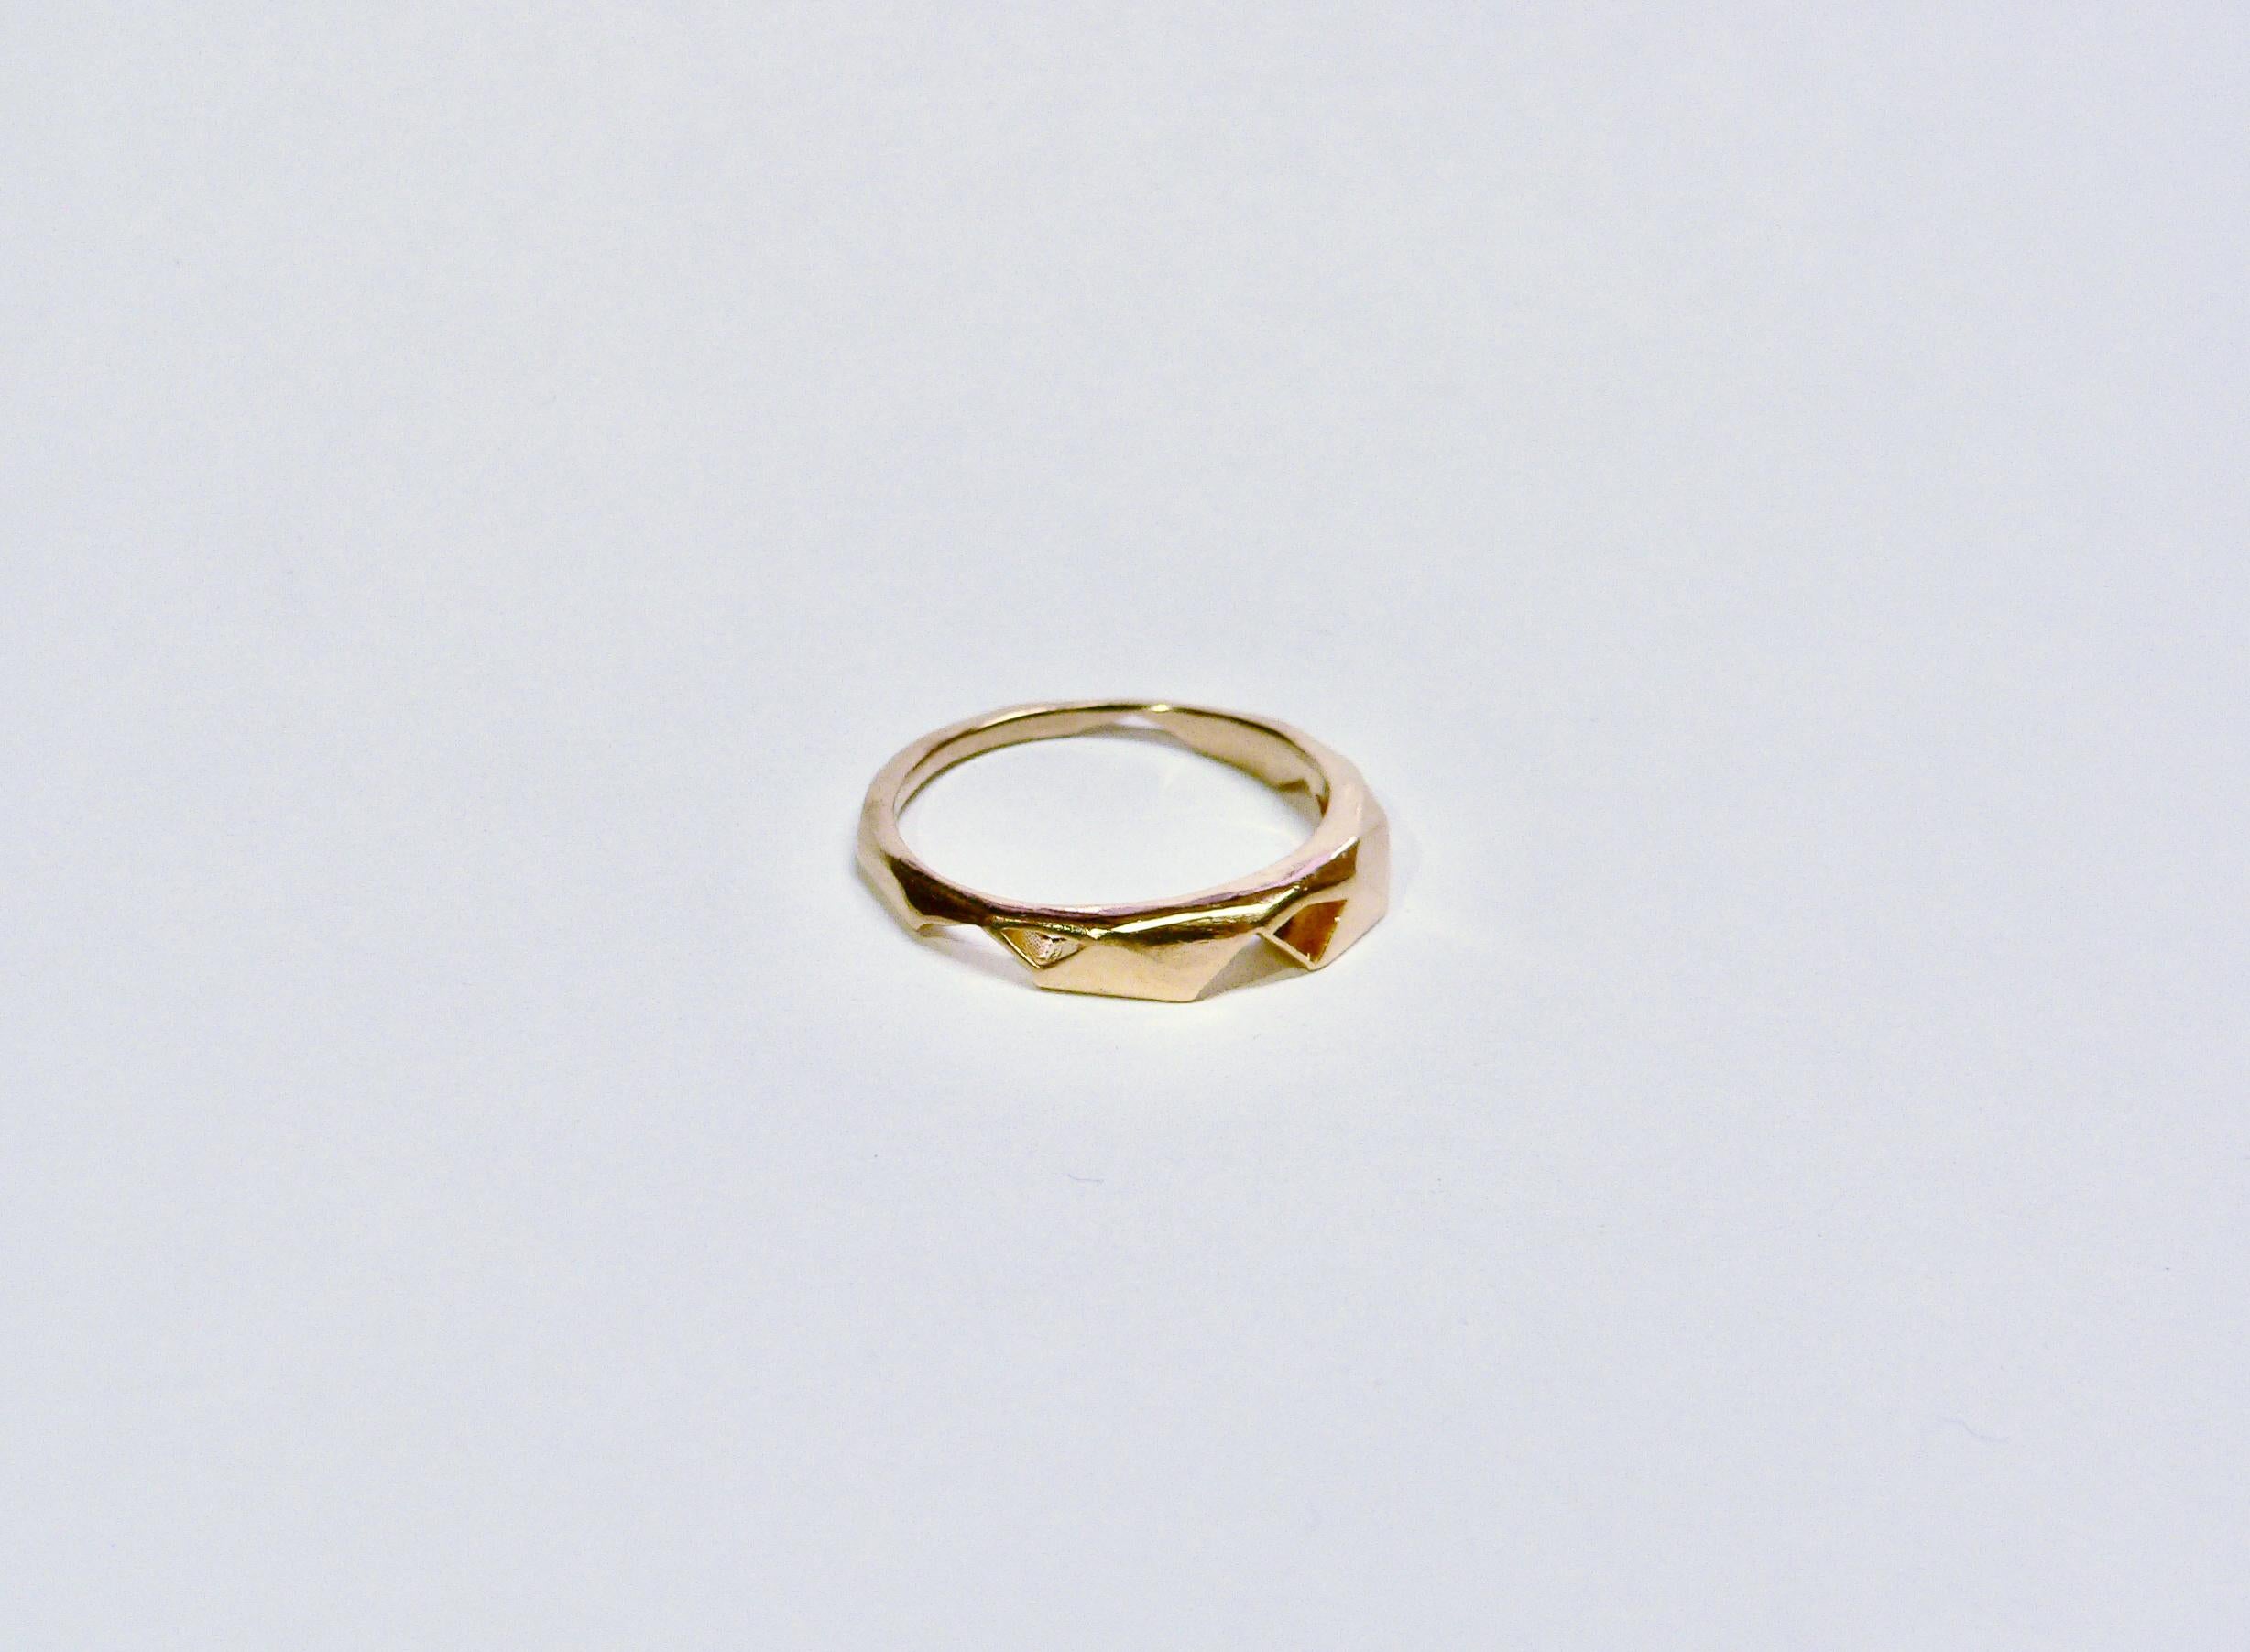 There are some geometric shapes, this ring os one of the geometry shapes. This Geometry ring, two rings are separately, and this can be used by each. This is type B ring. This ring is made of Sterling Silver with 18 karat yellow gold plated as one